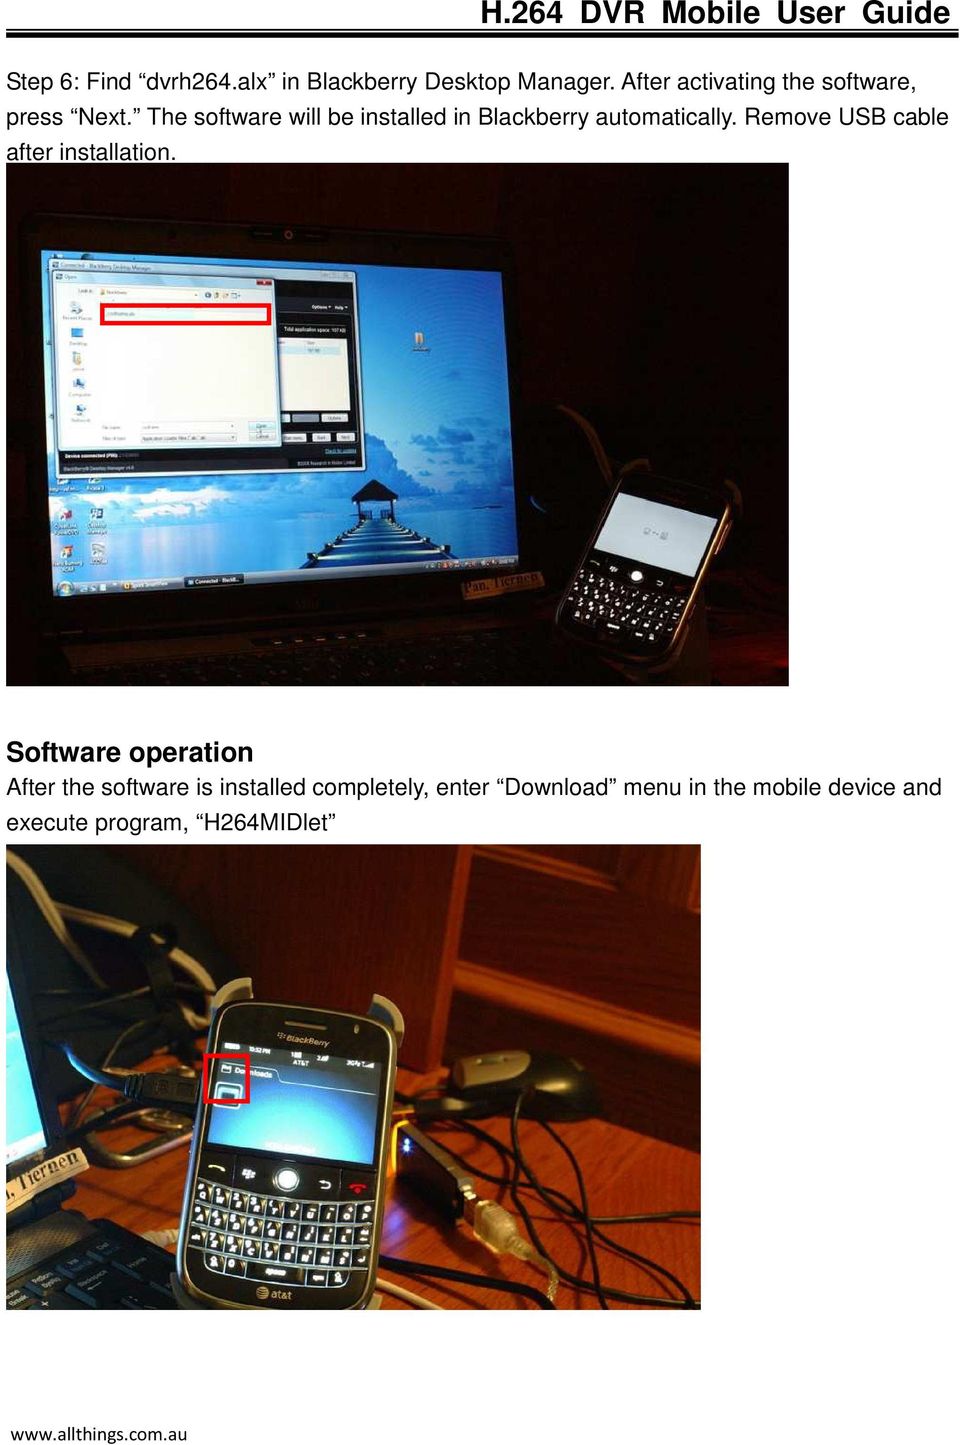 The software will be installed in Blackberry automatically.